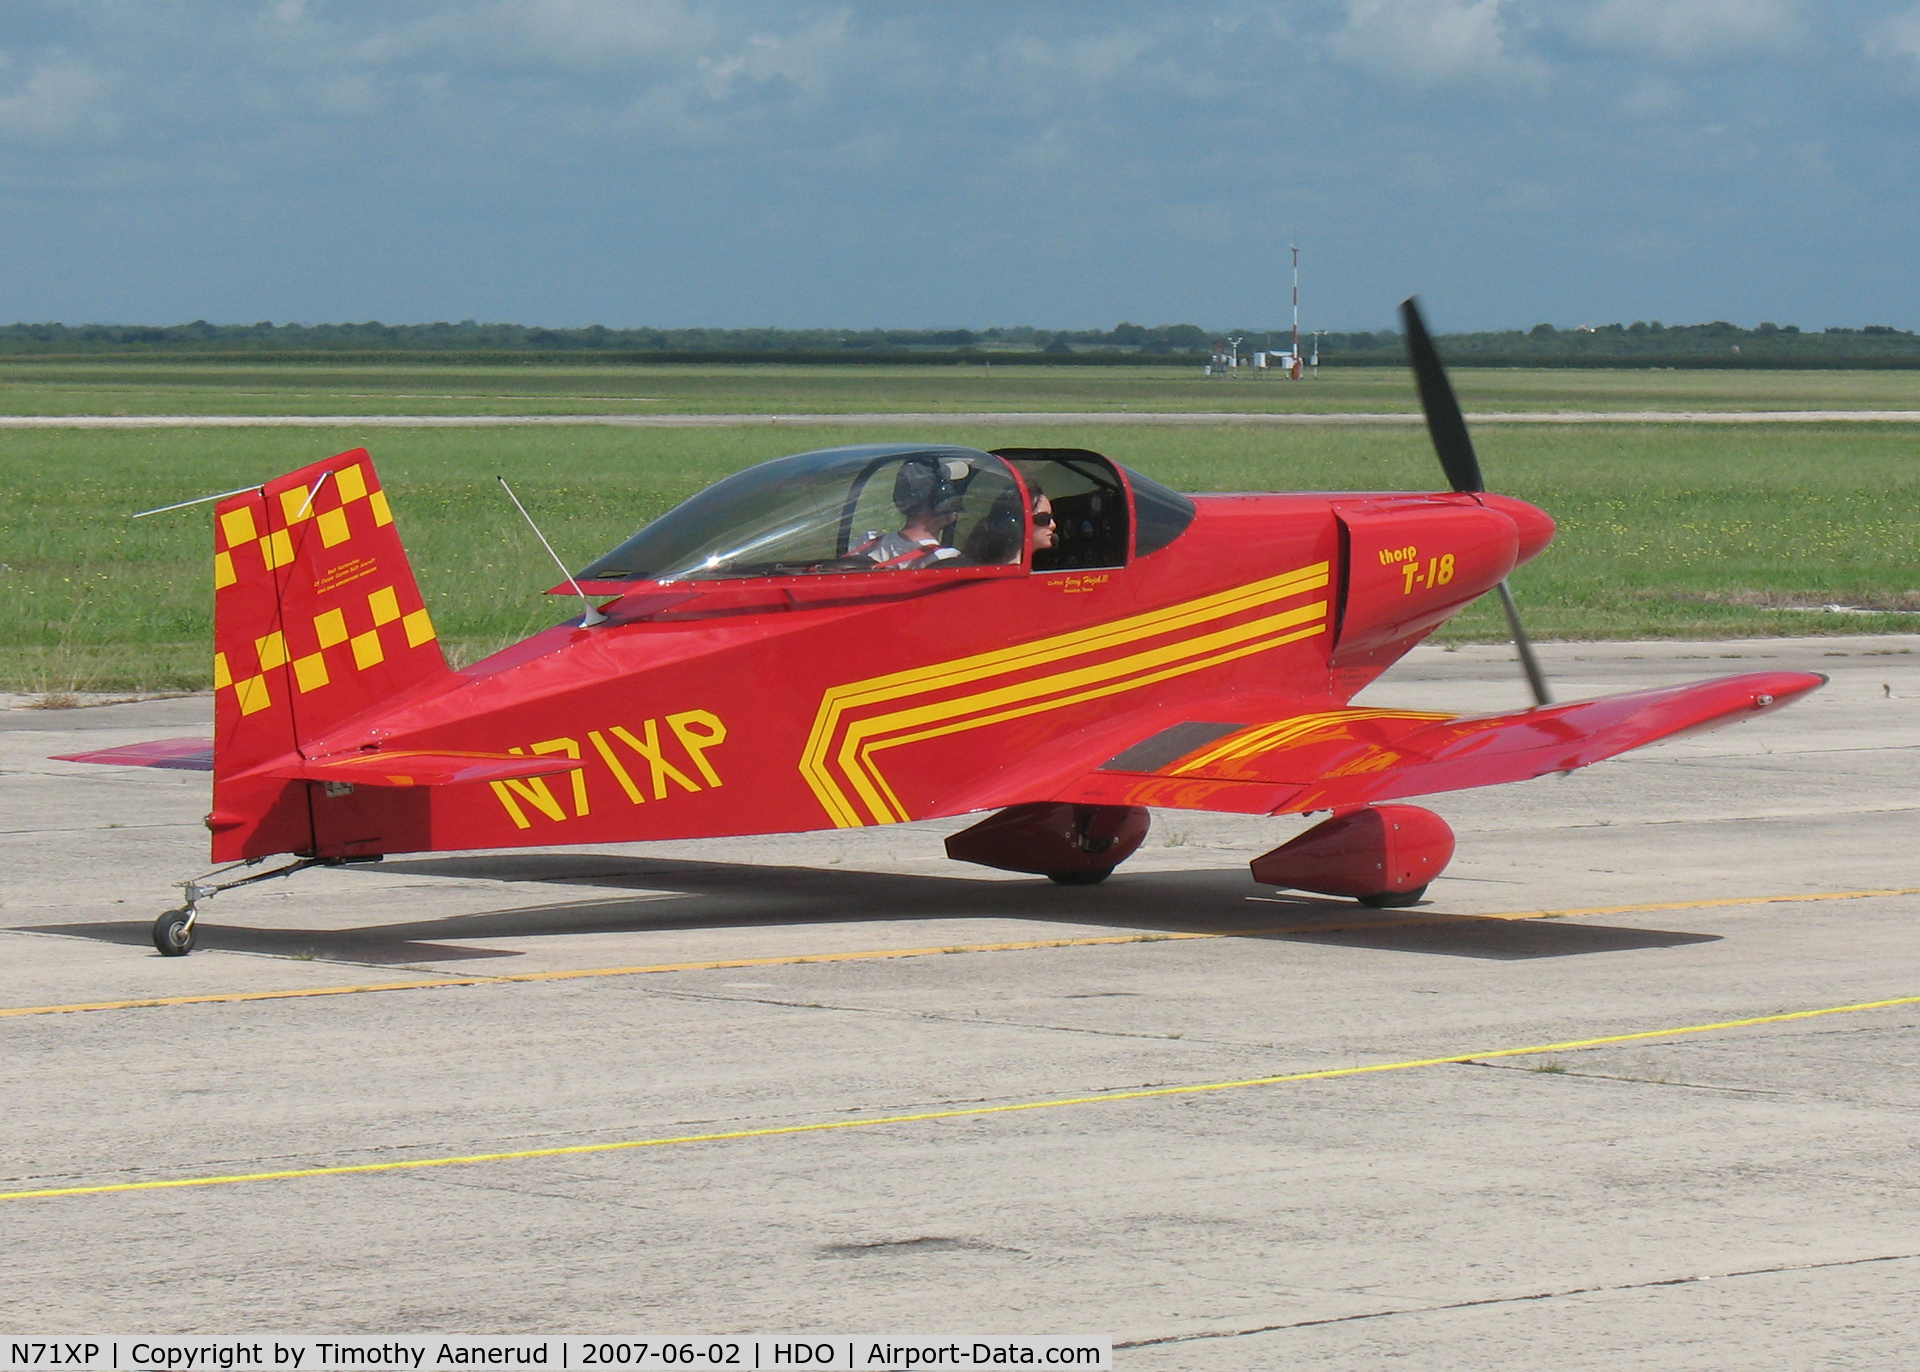 N71XP, 1972 Thorp T-18 Tiger C/N 684-1, The EAA Texas Fly-In